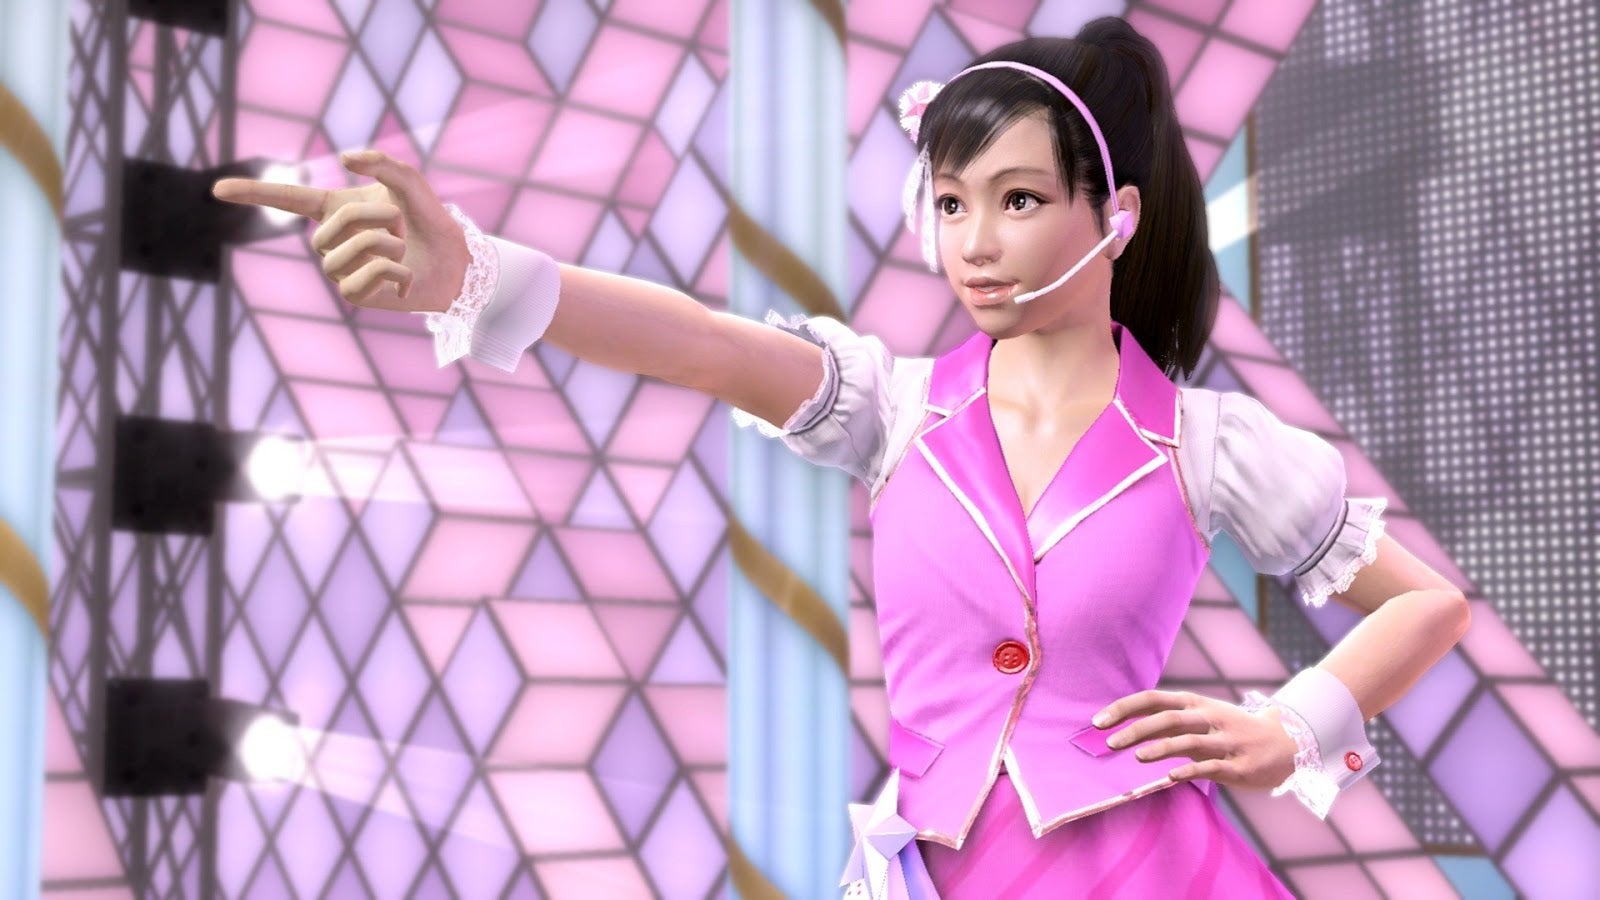 Kiryu's adoptive daughter Haruka (now a J-Pop idol in Yakuza 5) points at the crowd while performing in a pink dress.